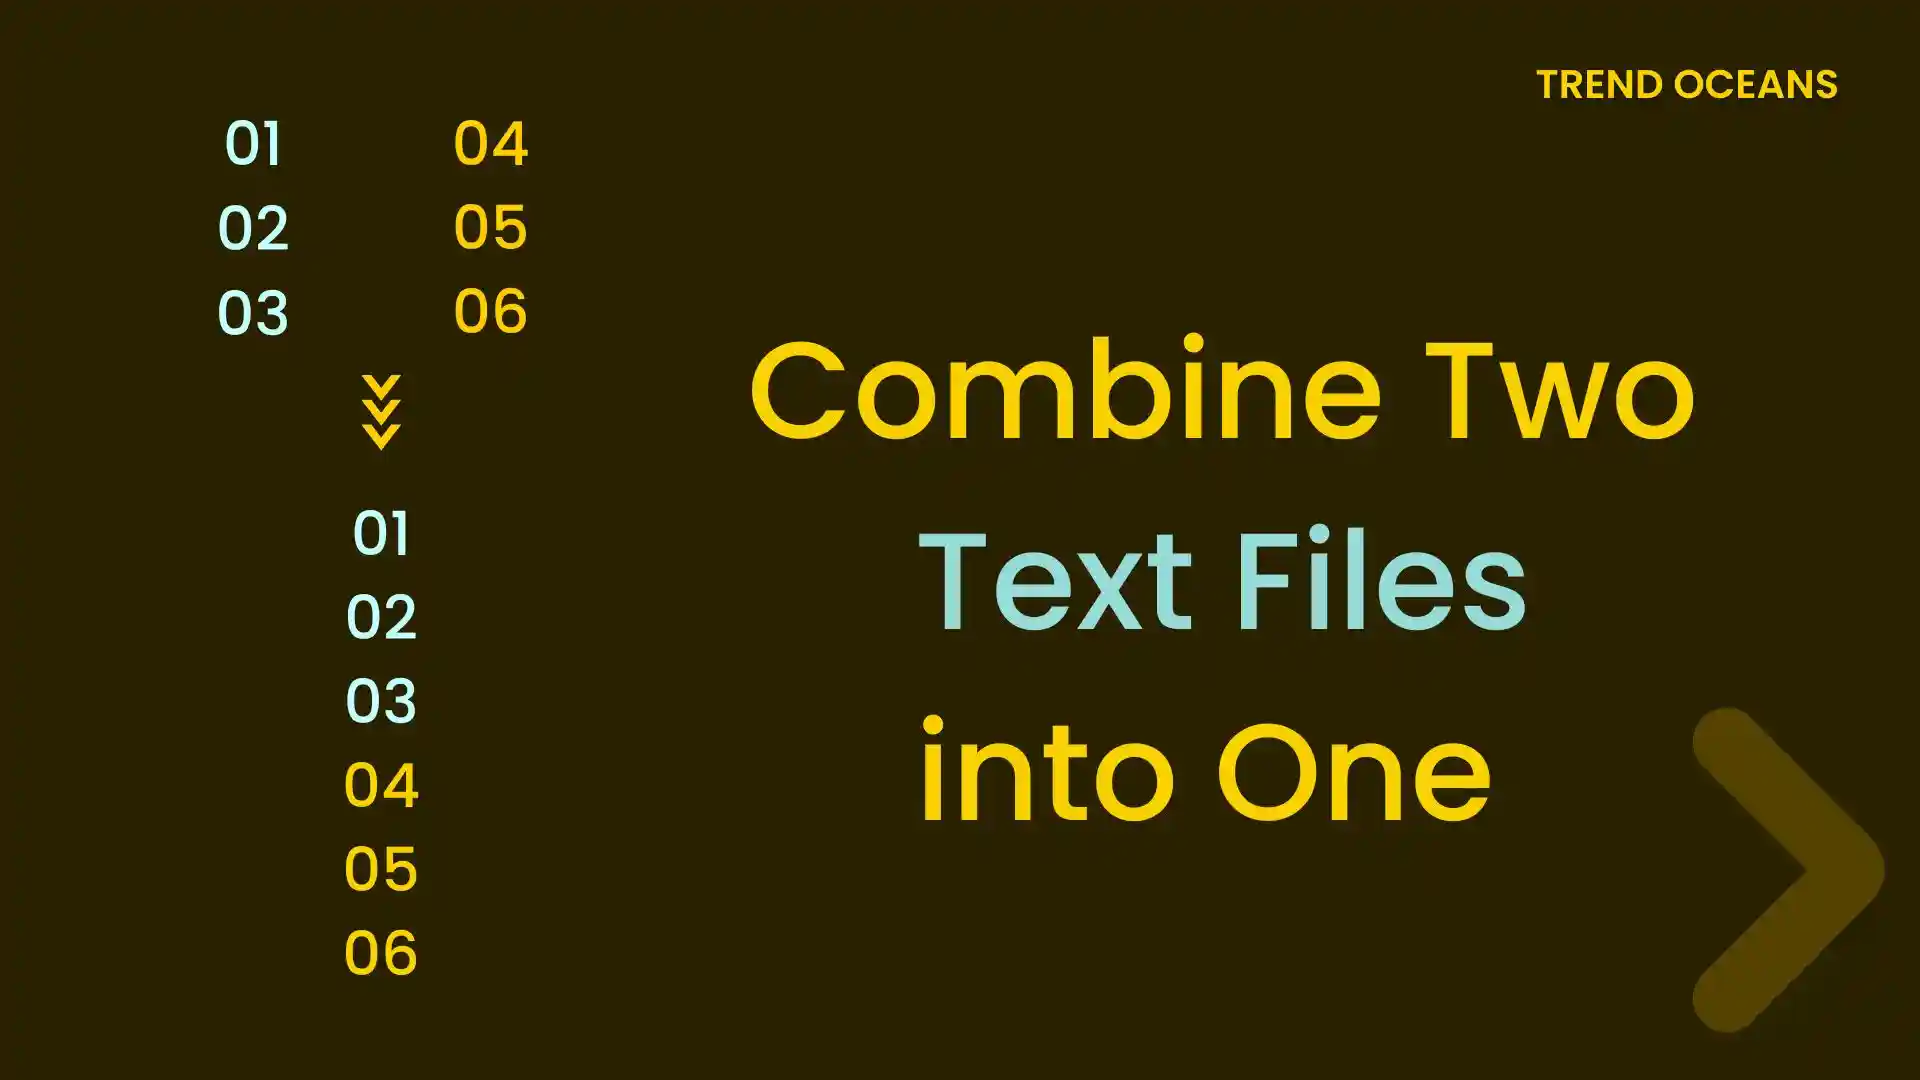 Combine Two Text Files into One